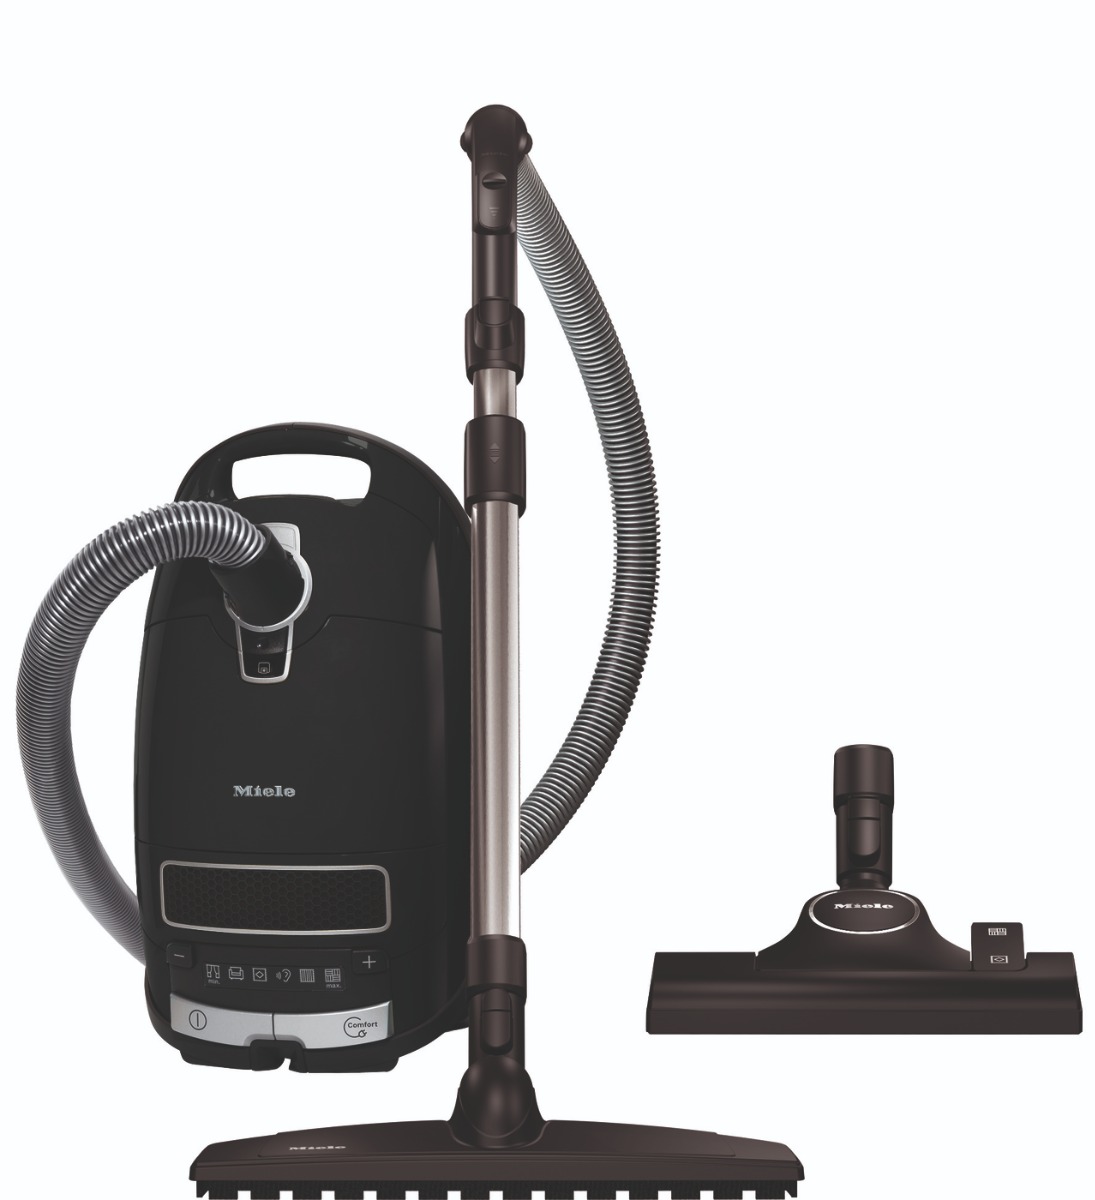 verkenner Fictief stroomkring Miele COMPLETE C3 PARQUET XL 890W Power Line Cylinder Vacuum Cleaner -  Obsidian Black | Donaghy Bros.